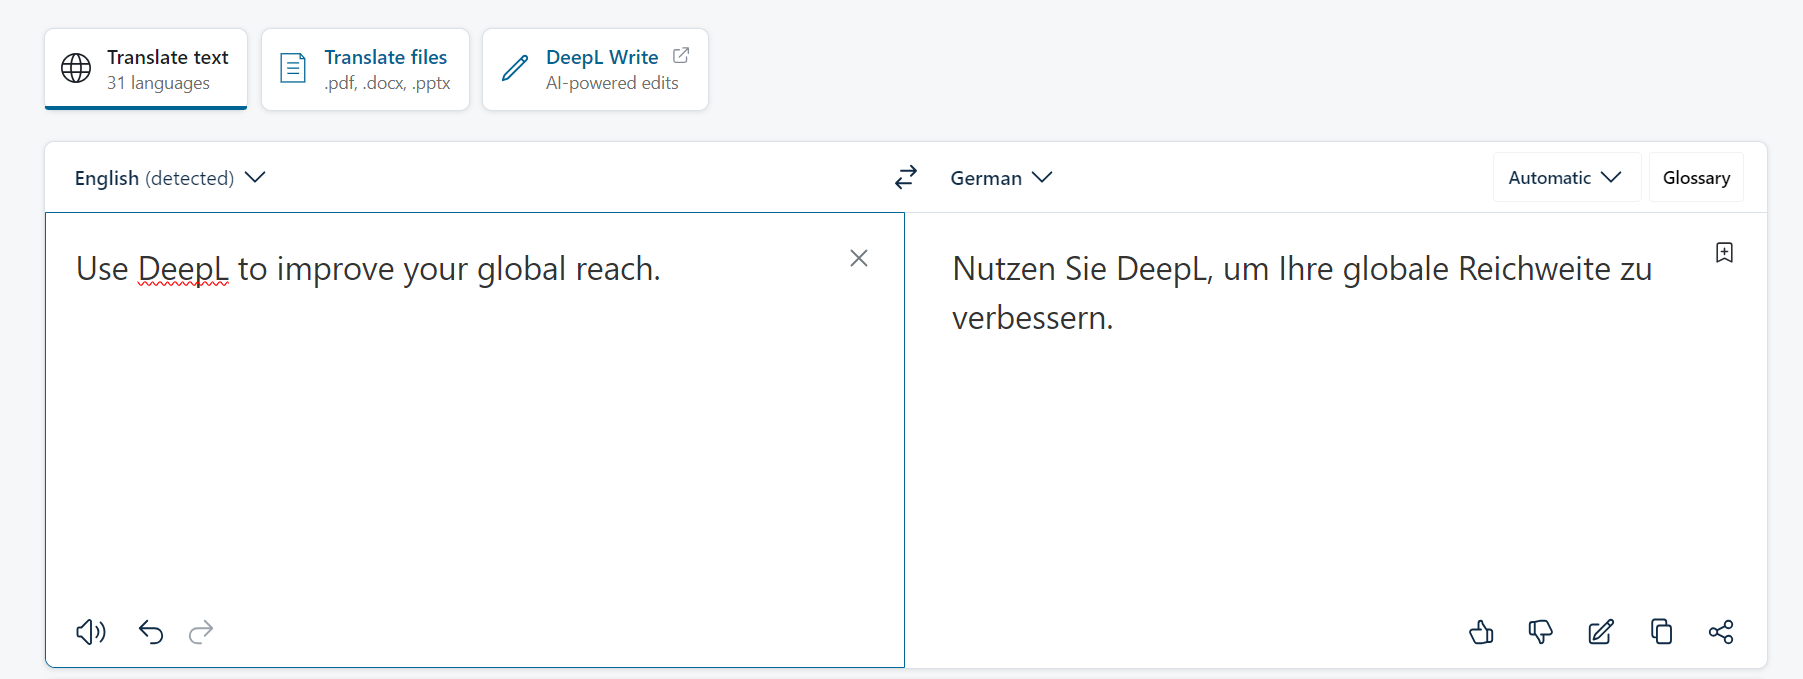 Example of a translation from English to German with DeepL.